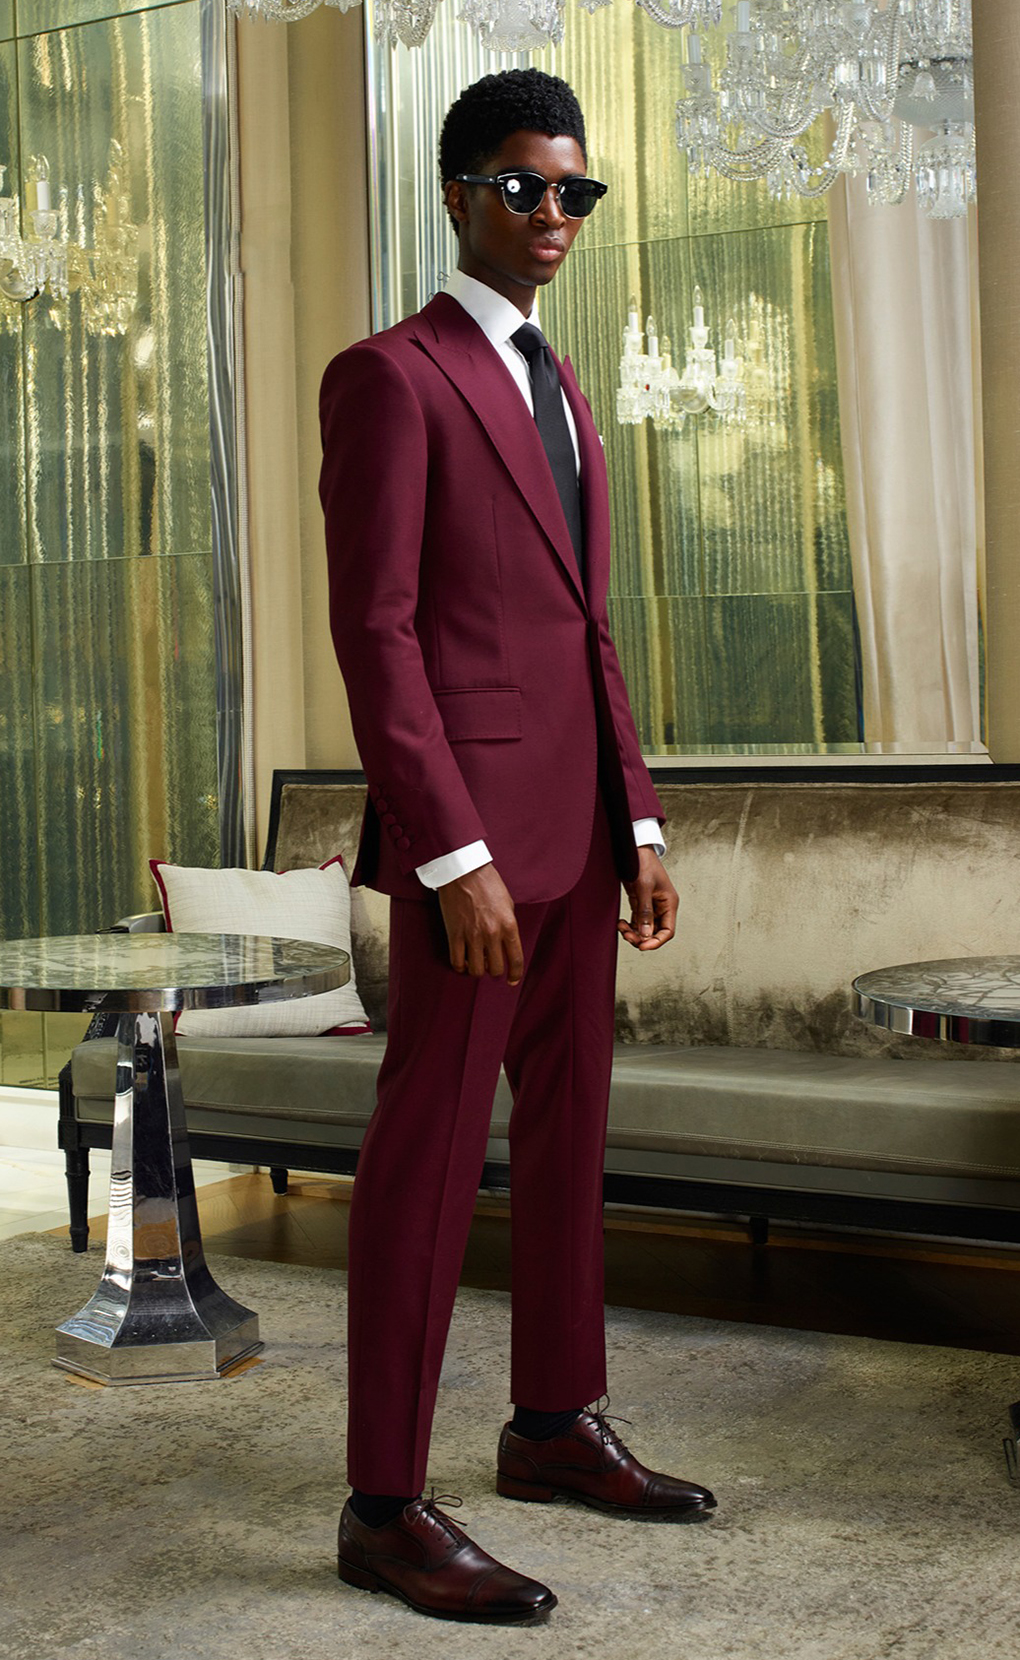 Burgundy suit, white shirt, and solid black tie